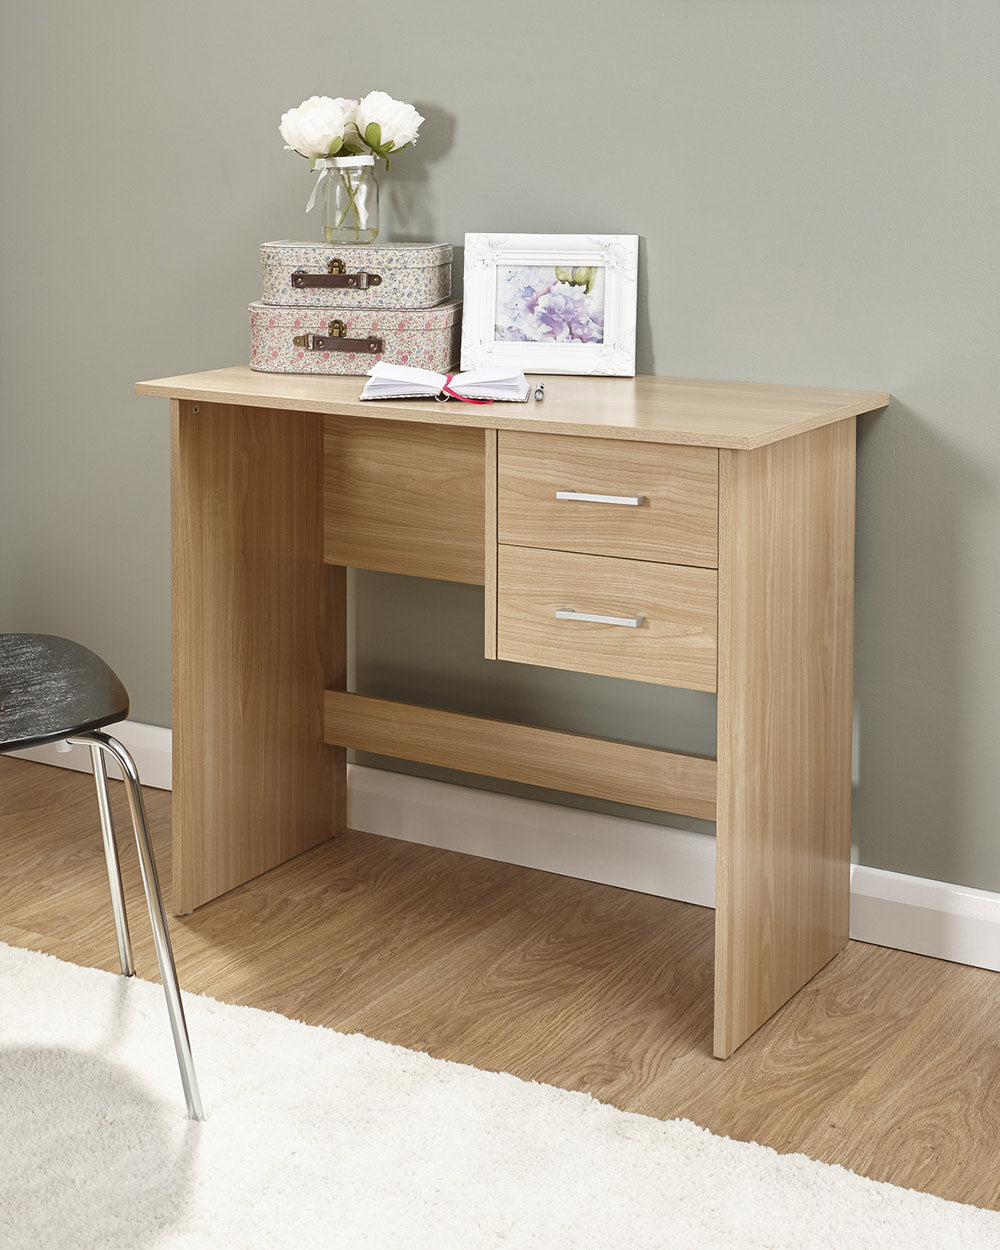 panama oak effect home office desk in a lifestyle image